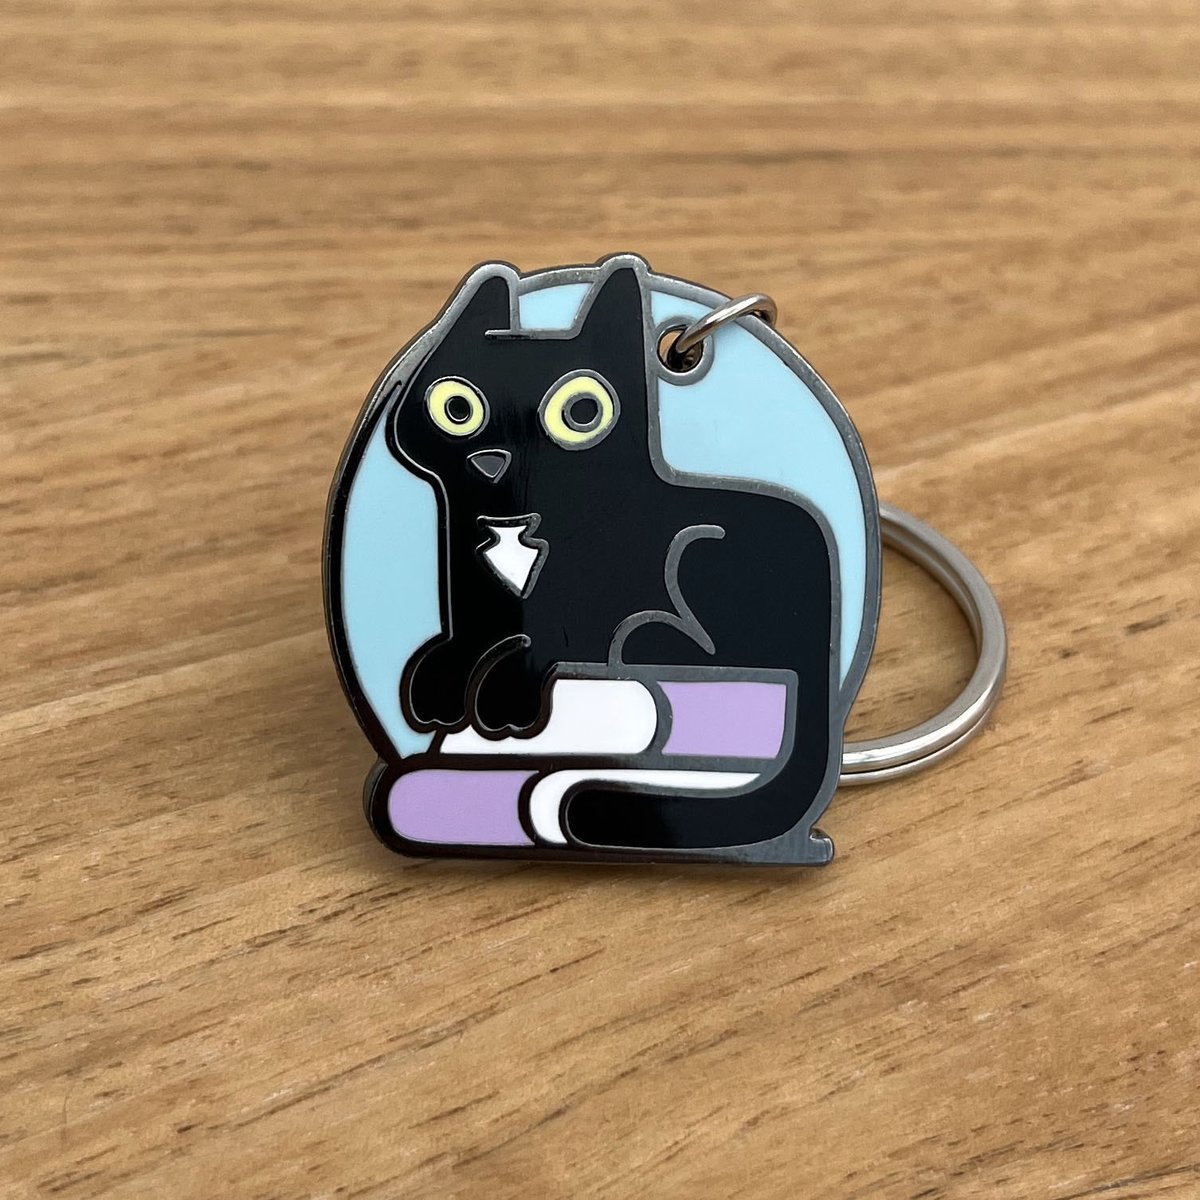 Have you seen our cat themed keyrings? Made from hard enamel, they are both cute and hard wearing! Take a look 💕🐈‍⬛🔑 pickleandnancy.etsy.com #supportsmallbusiness